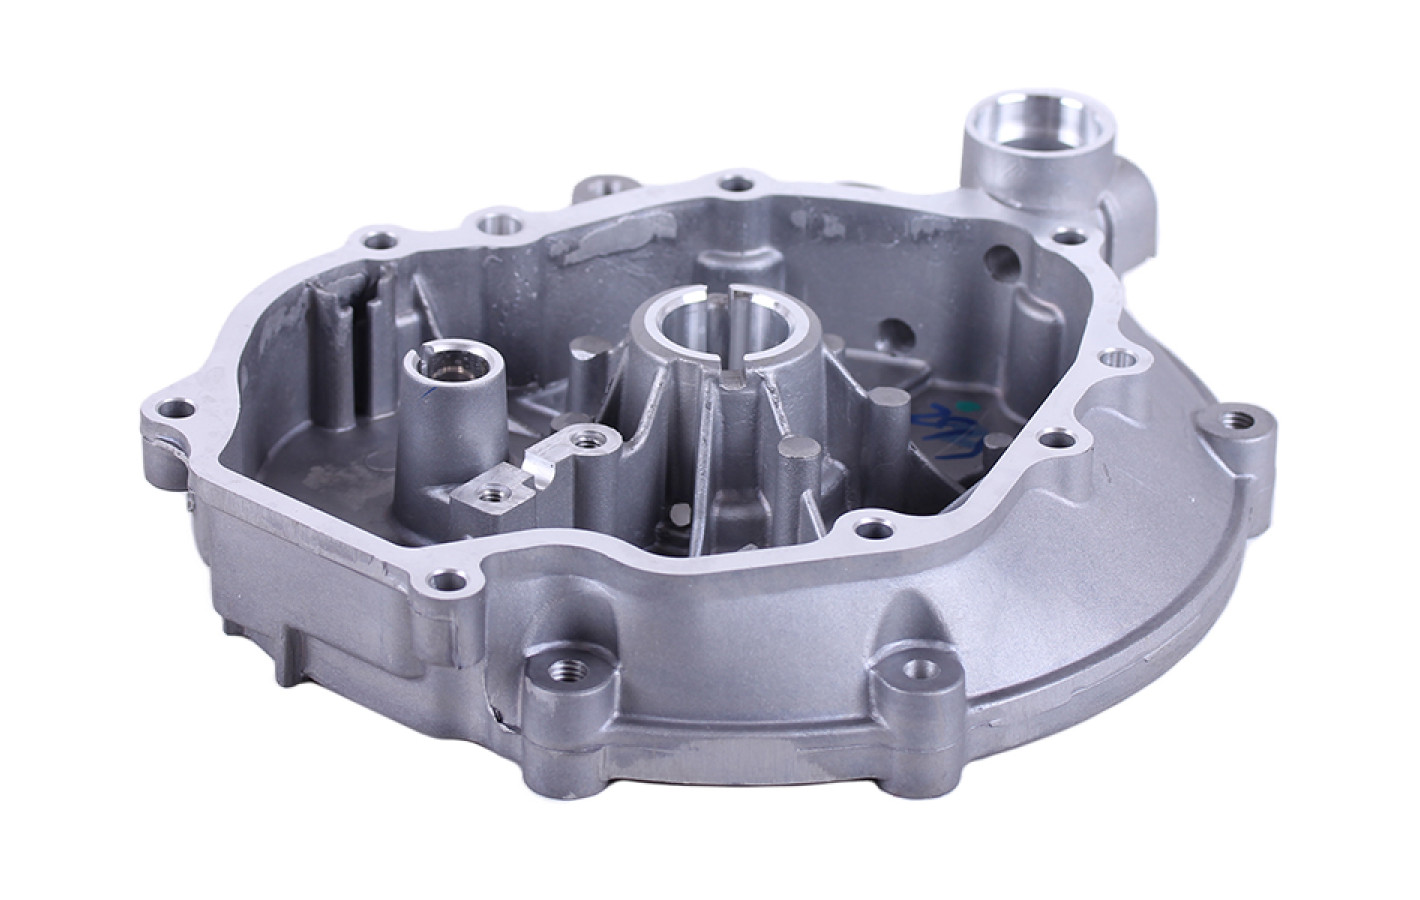 Engine block cover - P65F (ZS)